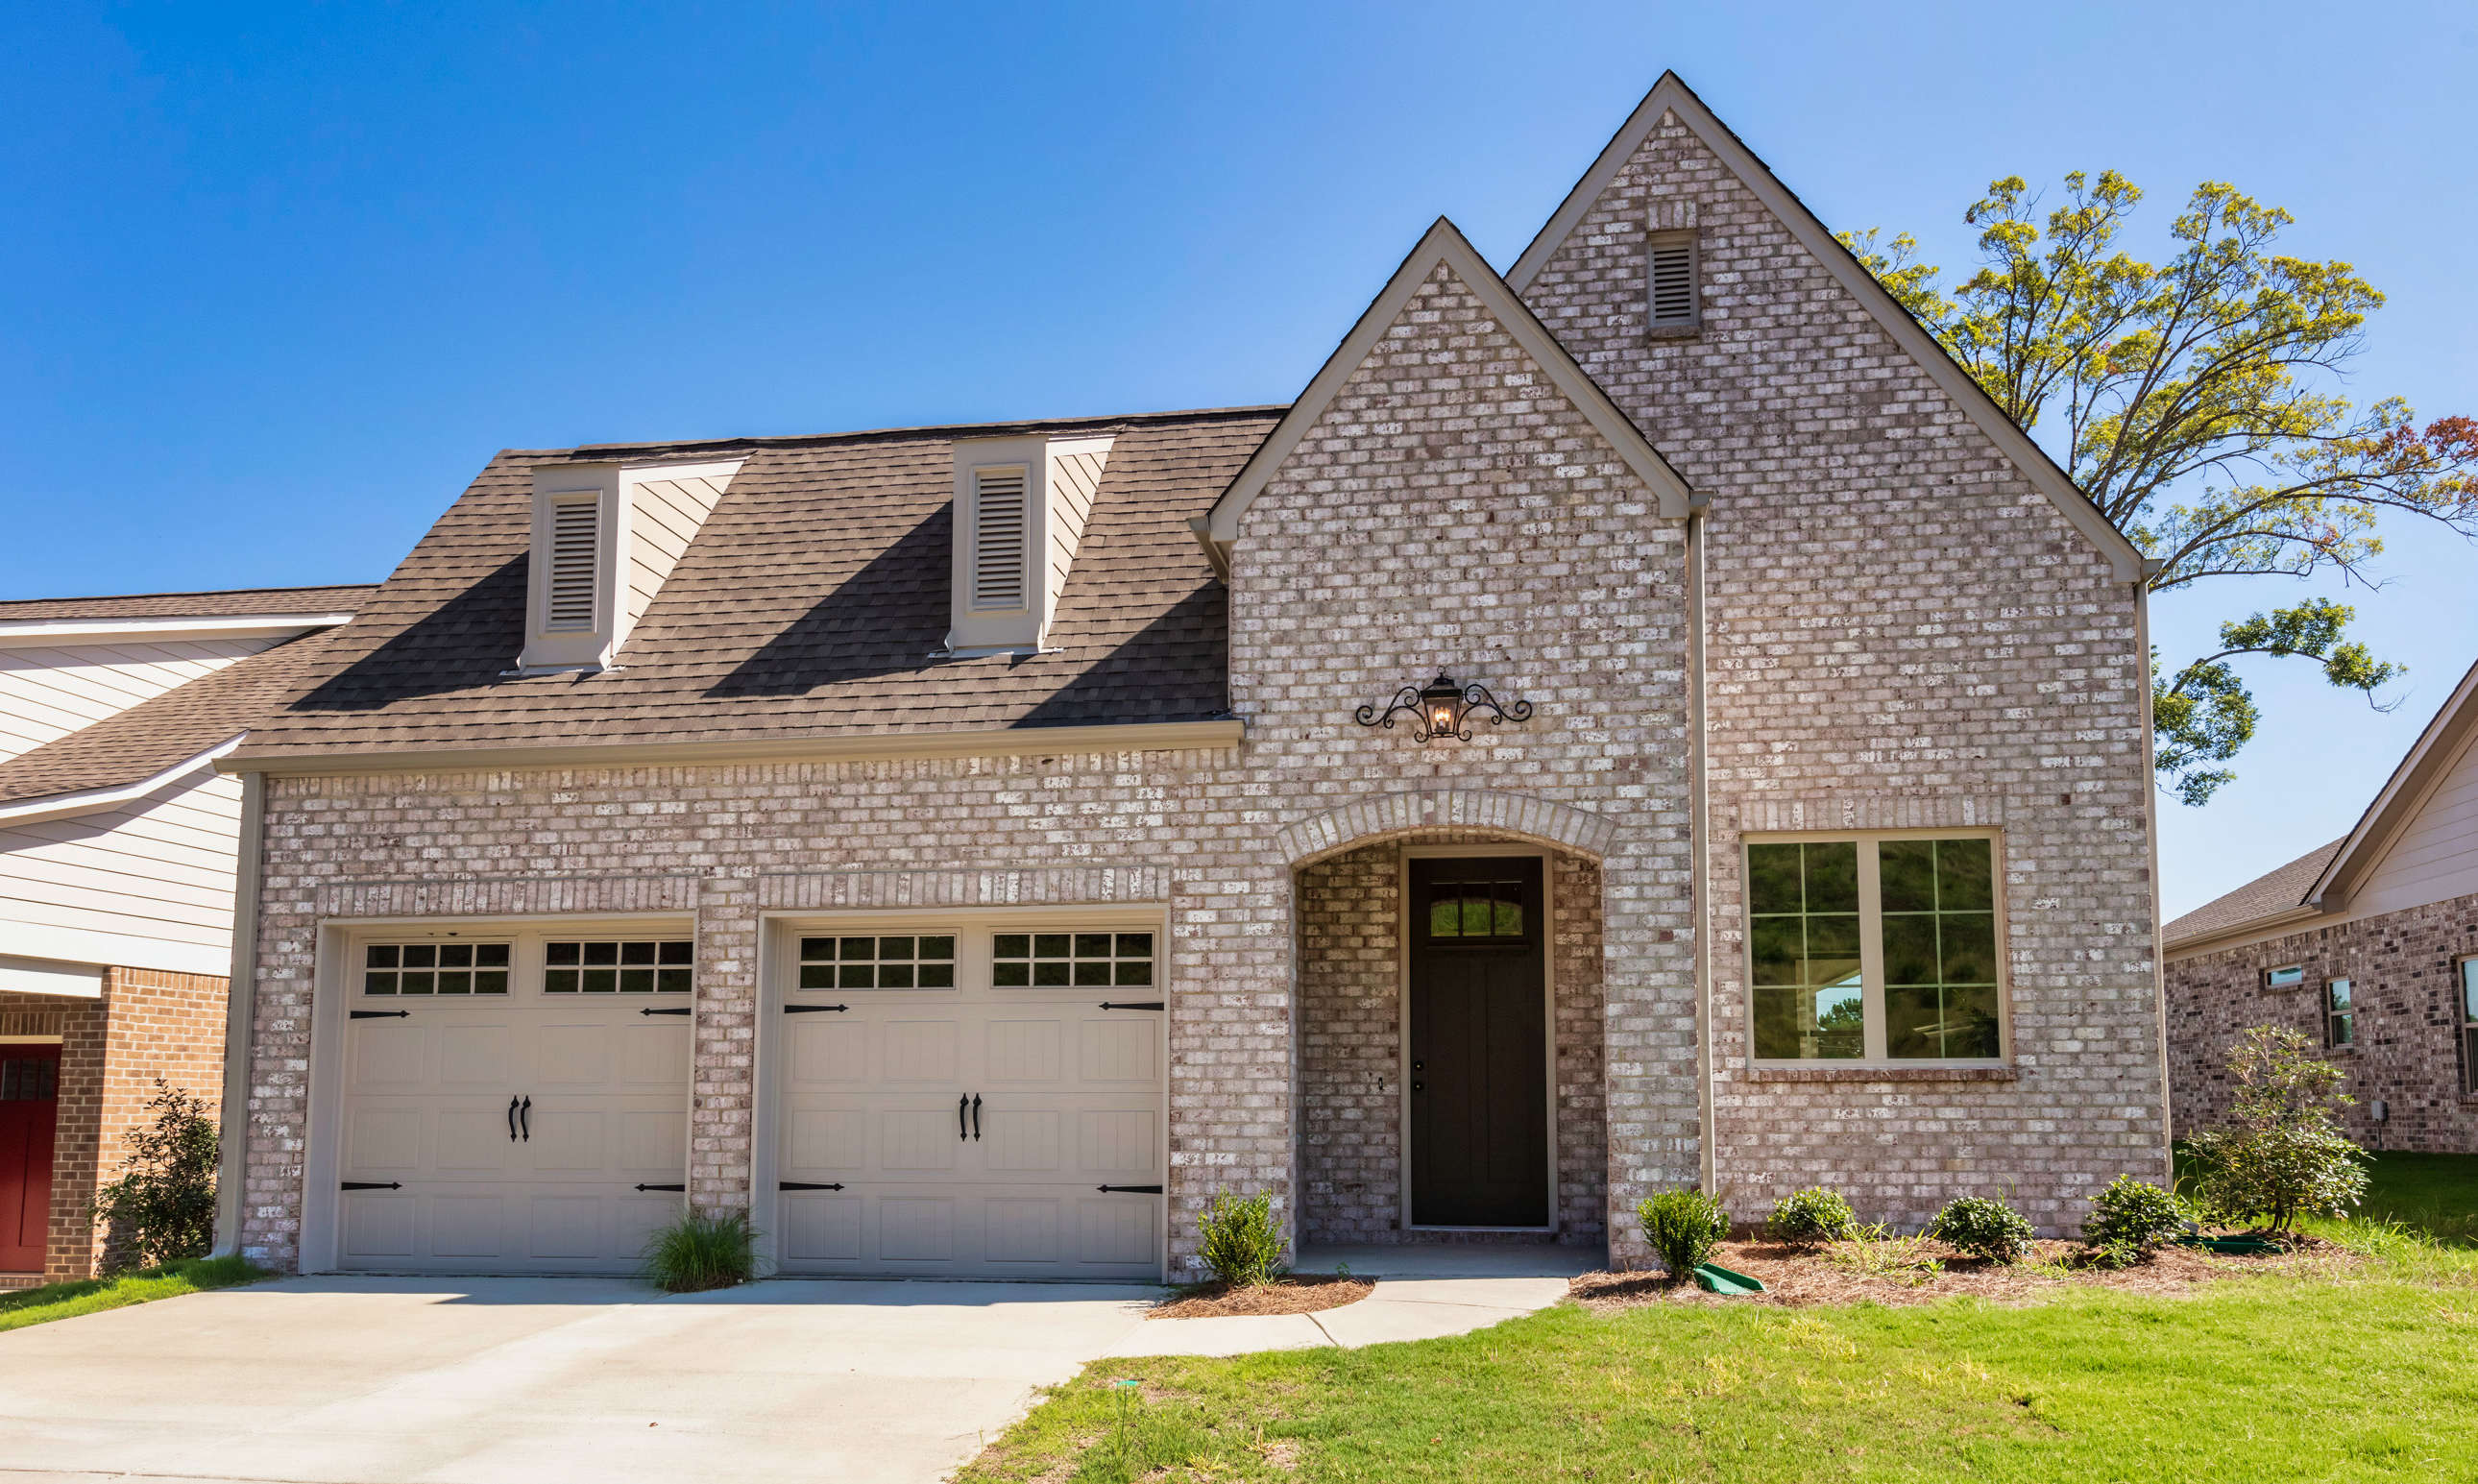 The Brooke floor plan is available at Woodridge - new homes near Birmingham by Tower Homes